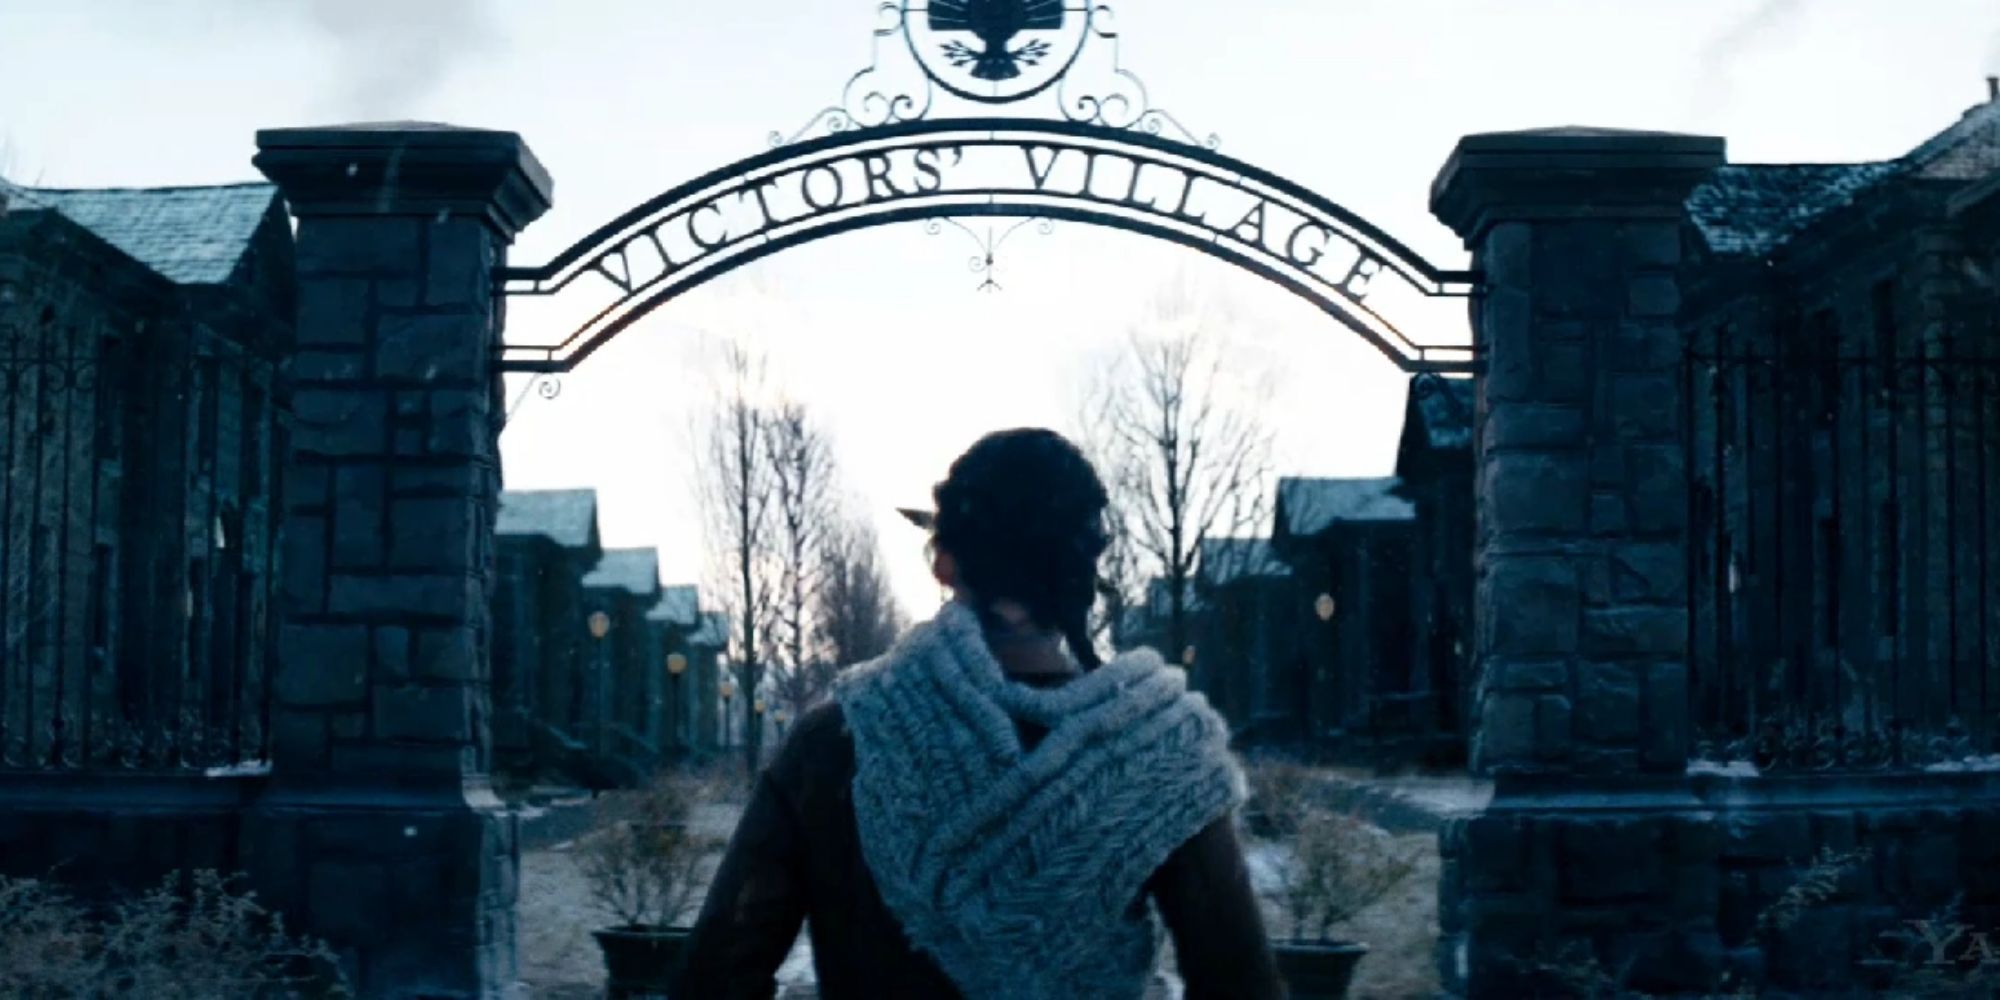 Katniss standing outside of the Gate of Victor's Village in The Hunger Games